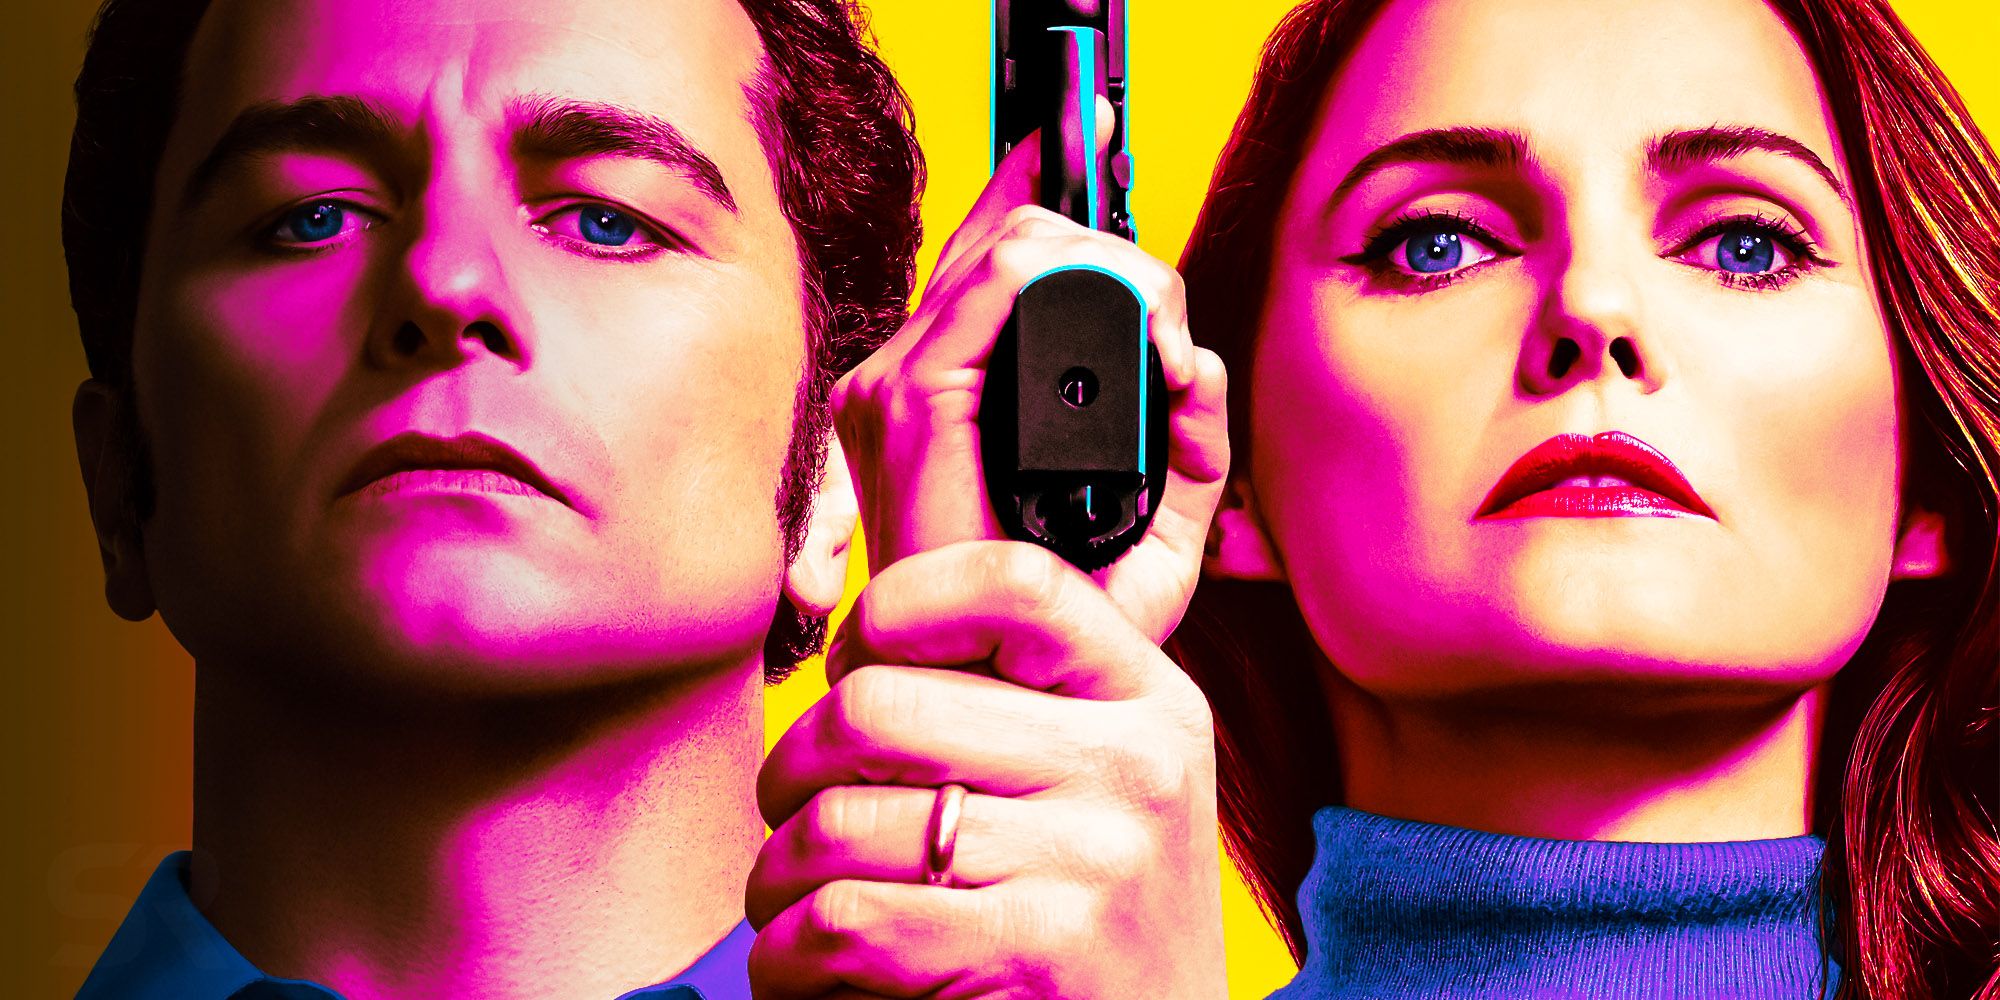 Matthew Rhys and Keri Russell on a stylized poster for The Americans